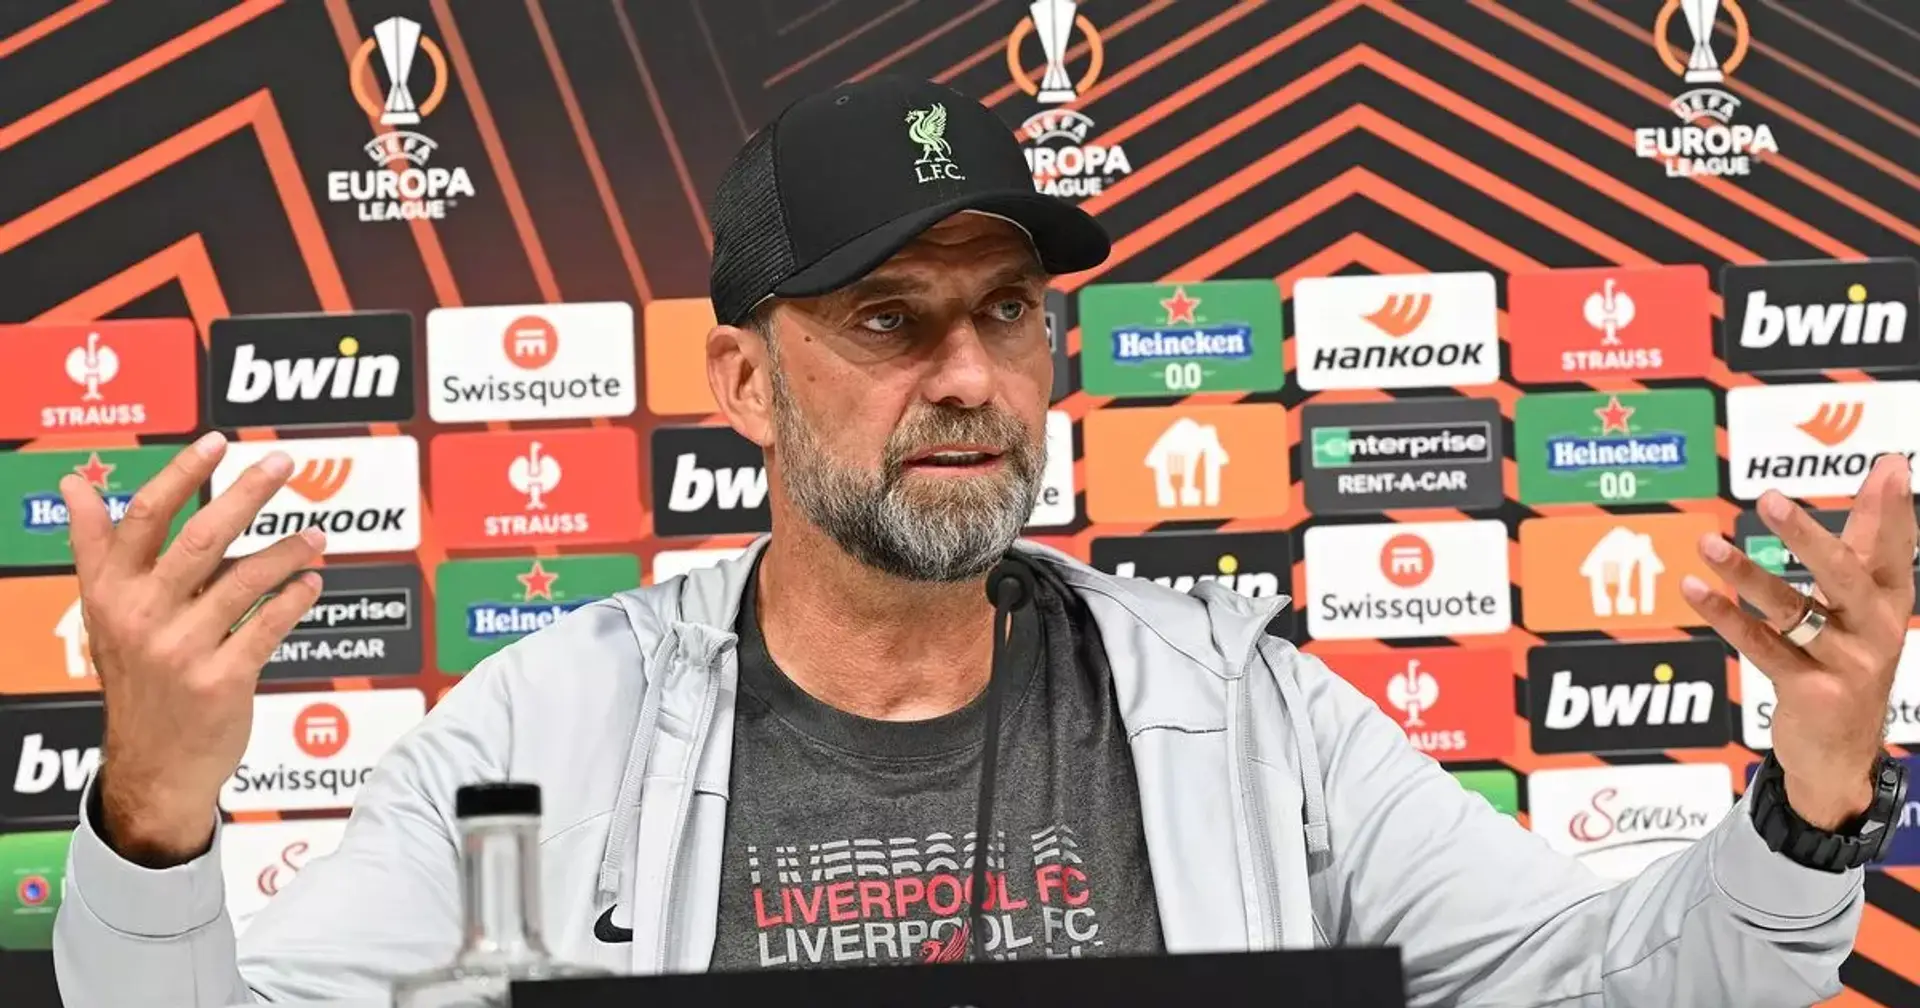 'They had to get rid of frustration': Klopp on what he told Liverpool players at half-time of LASK game